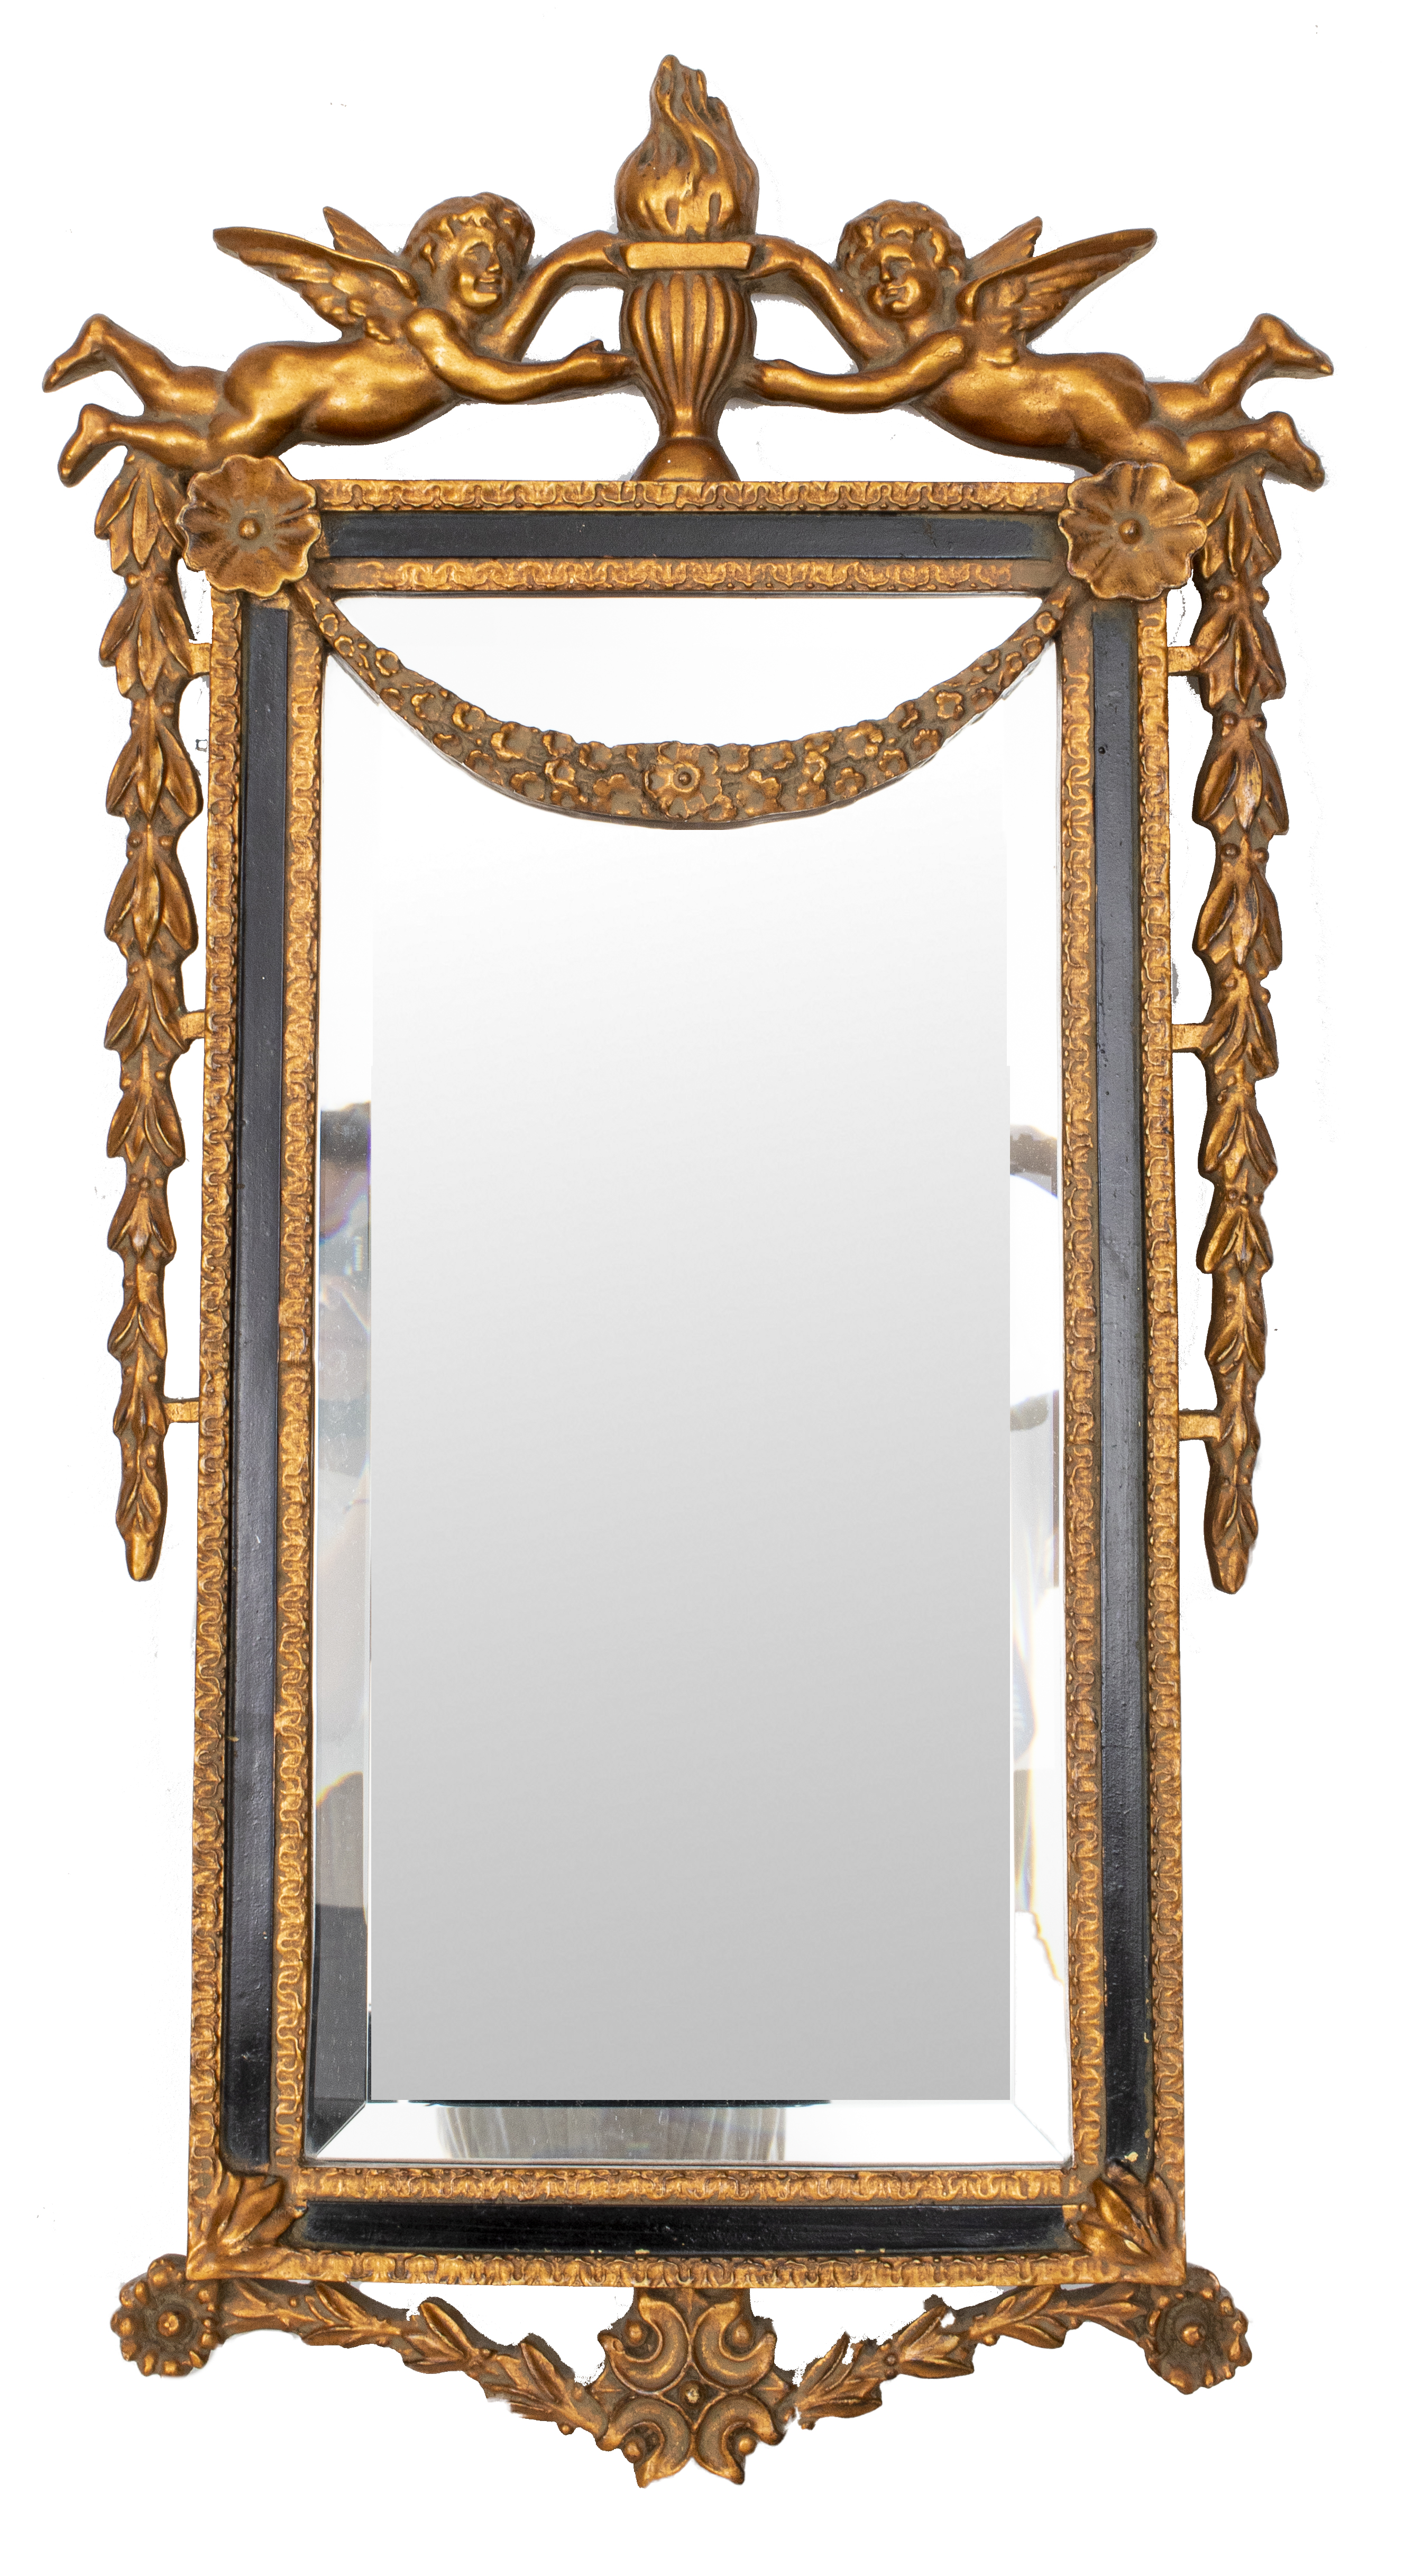 NEOCLASSICAL STYLE GILTWOOD MIRROR 2d39d7